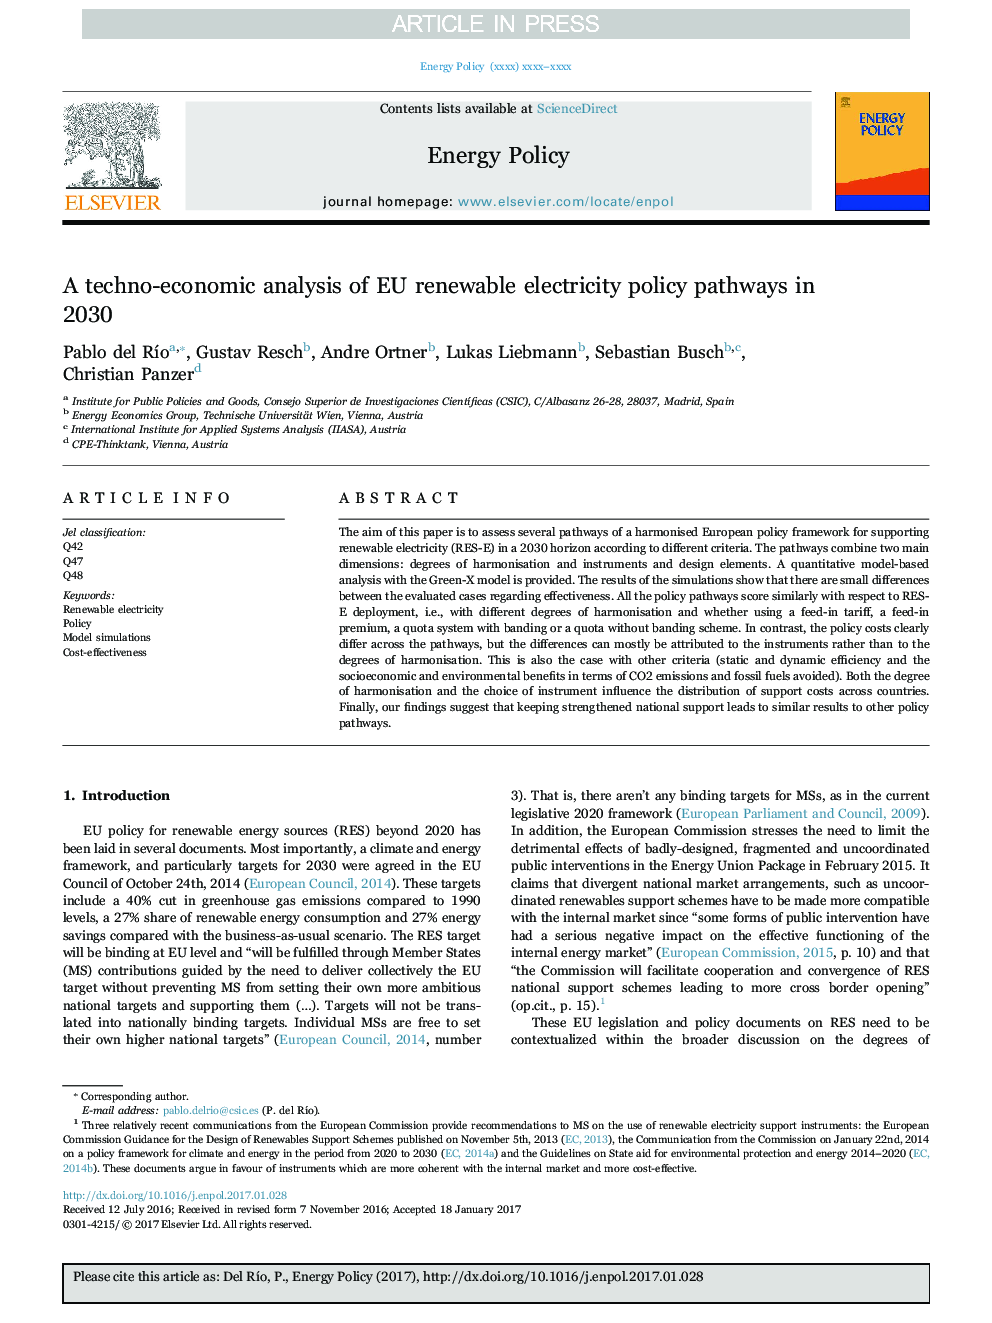 A techno-economic analysis of EU renewable electricity policy pathways in 2030